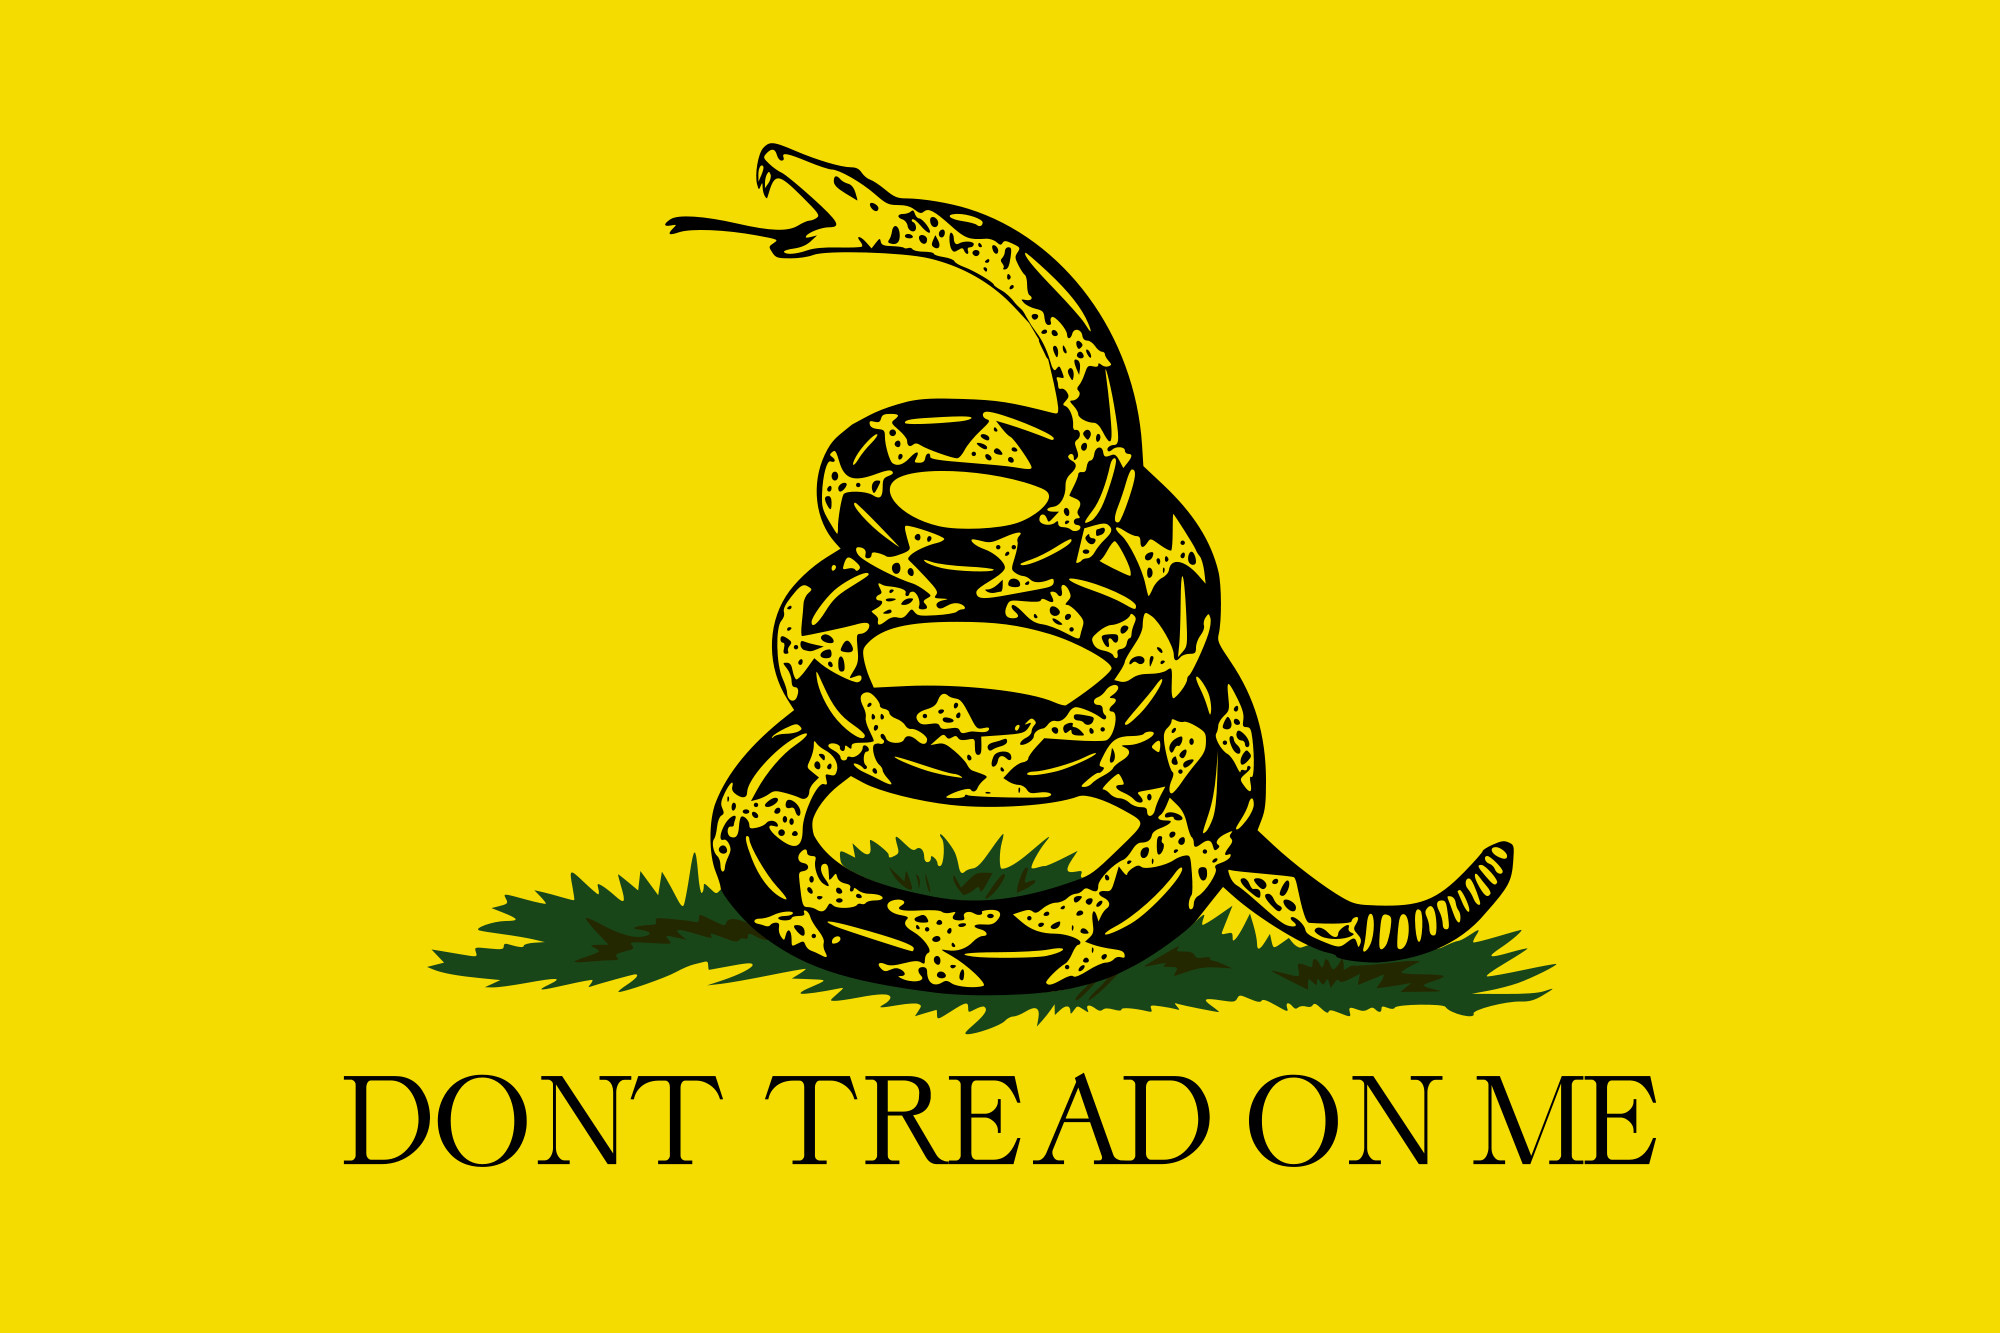 A rendering of the Gadsden Flag, a yellow field, with a lively representation of a rattle-snake in the middle, in the attitude of going to strike, and phrase 'Dont Tread on Me!' (sic) underneath, as represented by Colonel Christopher Gadsden to be used by the commander in chief of the newly established American navy, 1775.